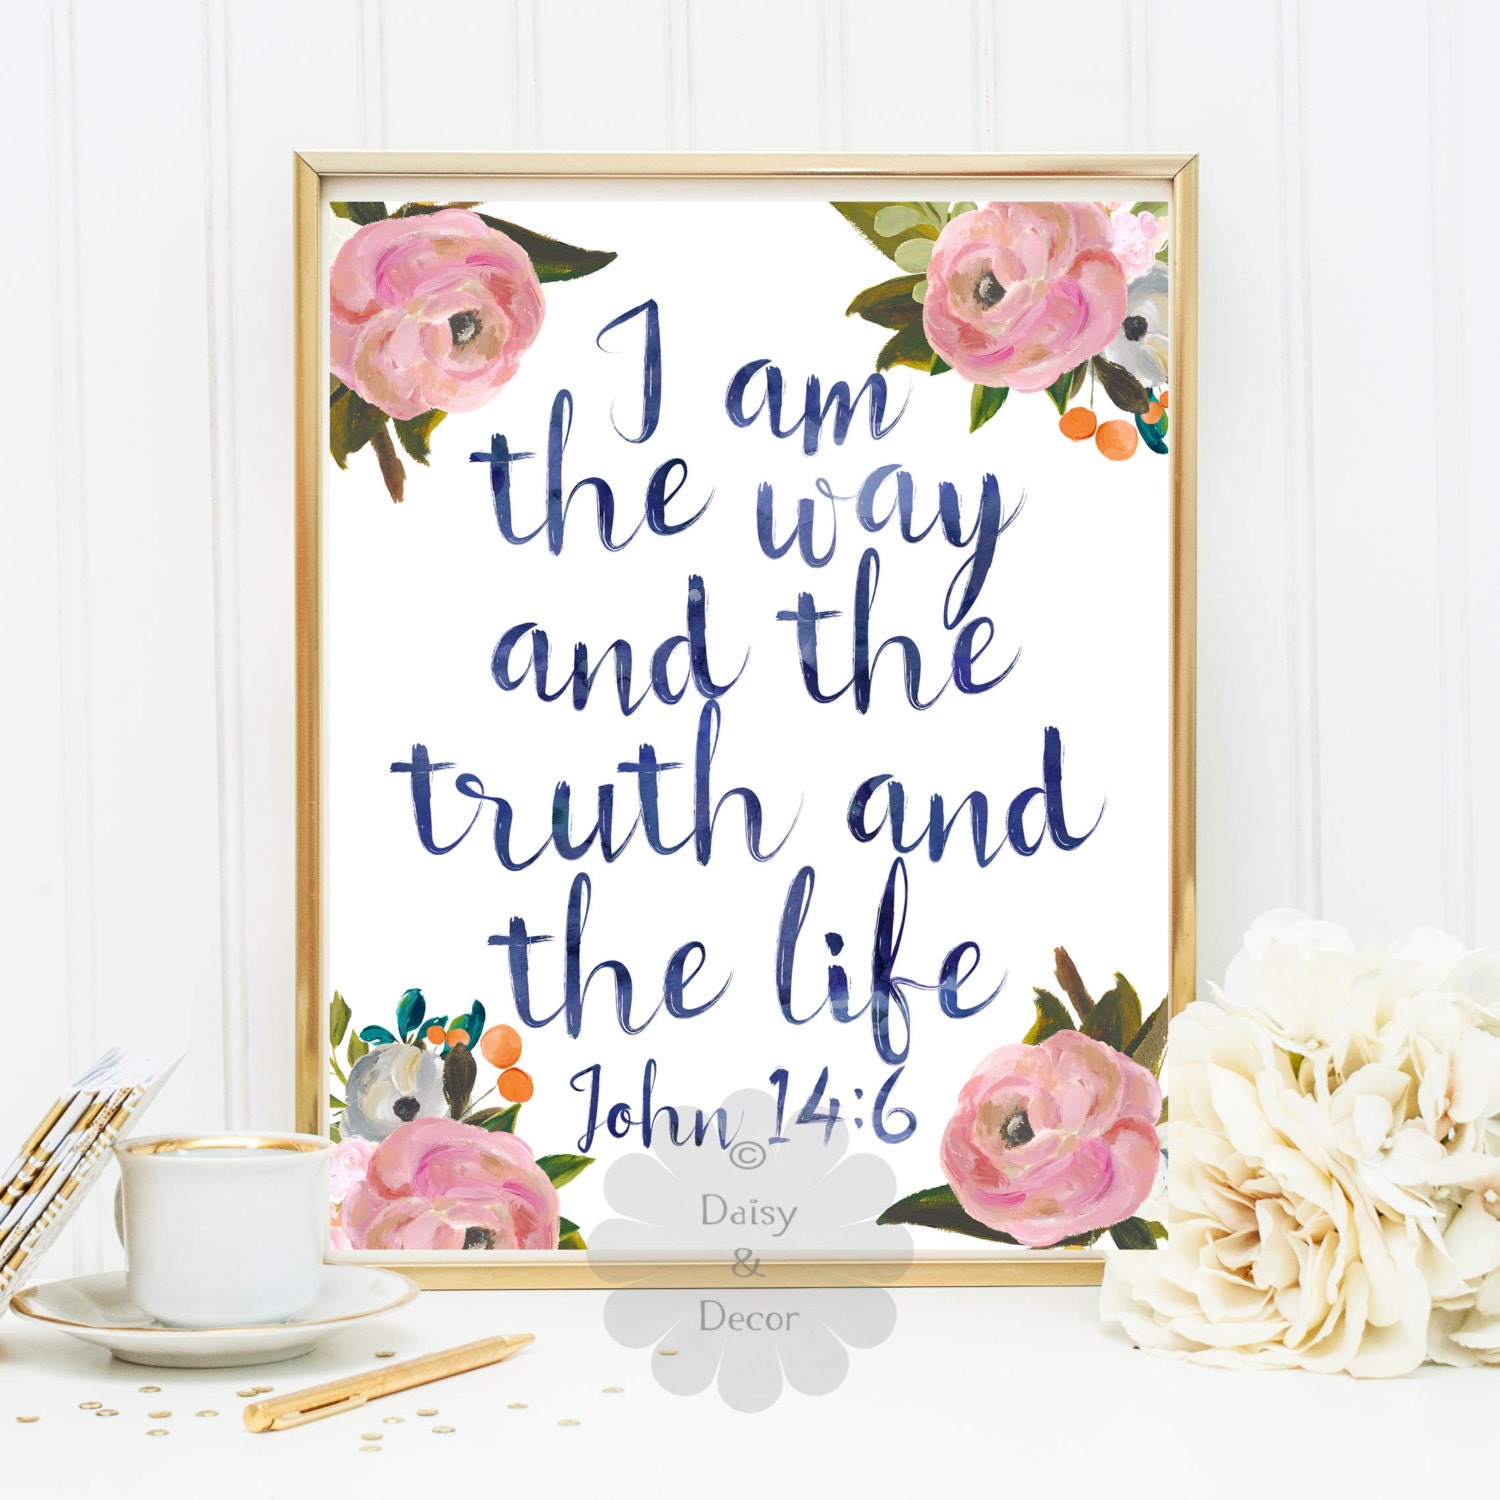 Albums 104+ Images verse i am the way the truth and the life Excellent